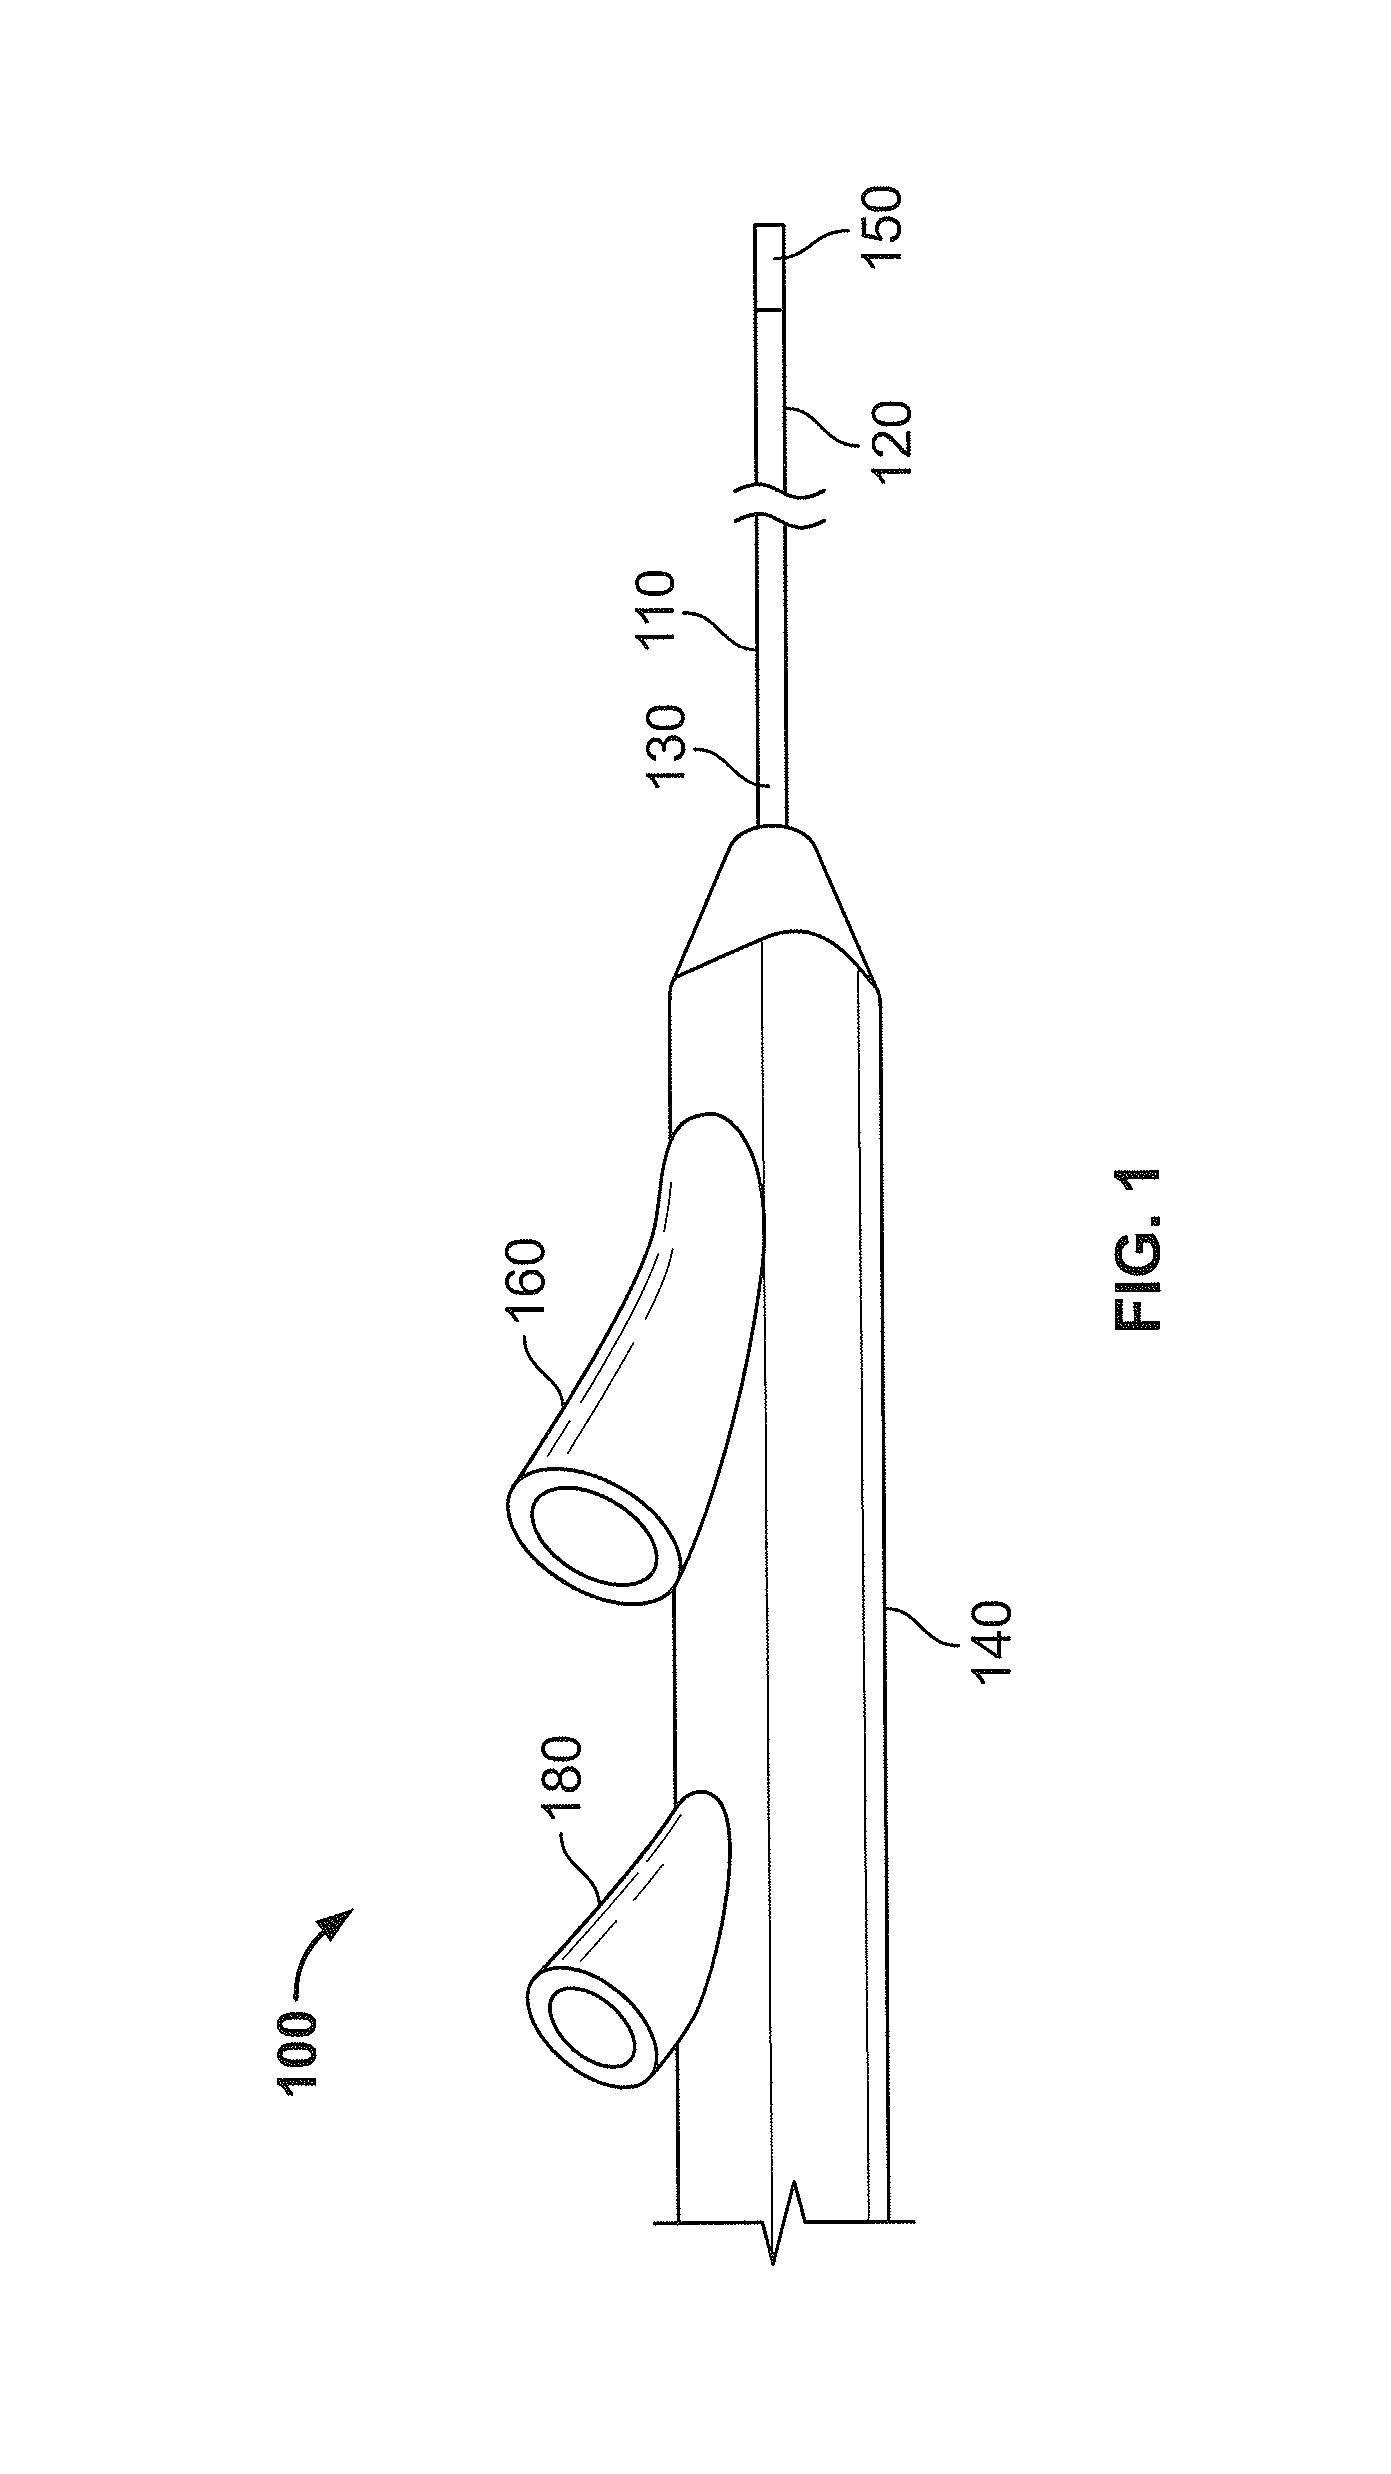 Bronchoscope-Compatible Catheter Provided with Electrosurgical Device